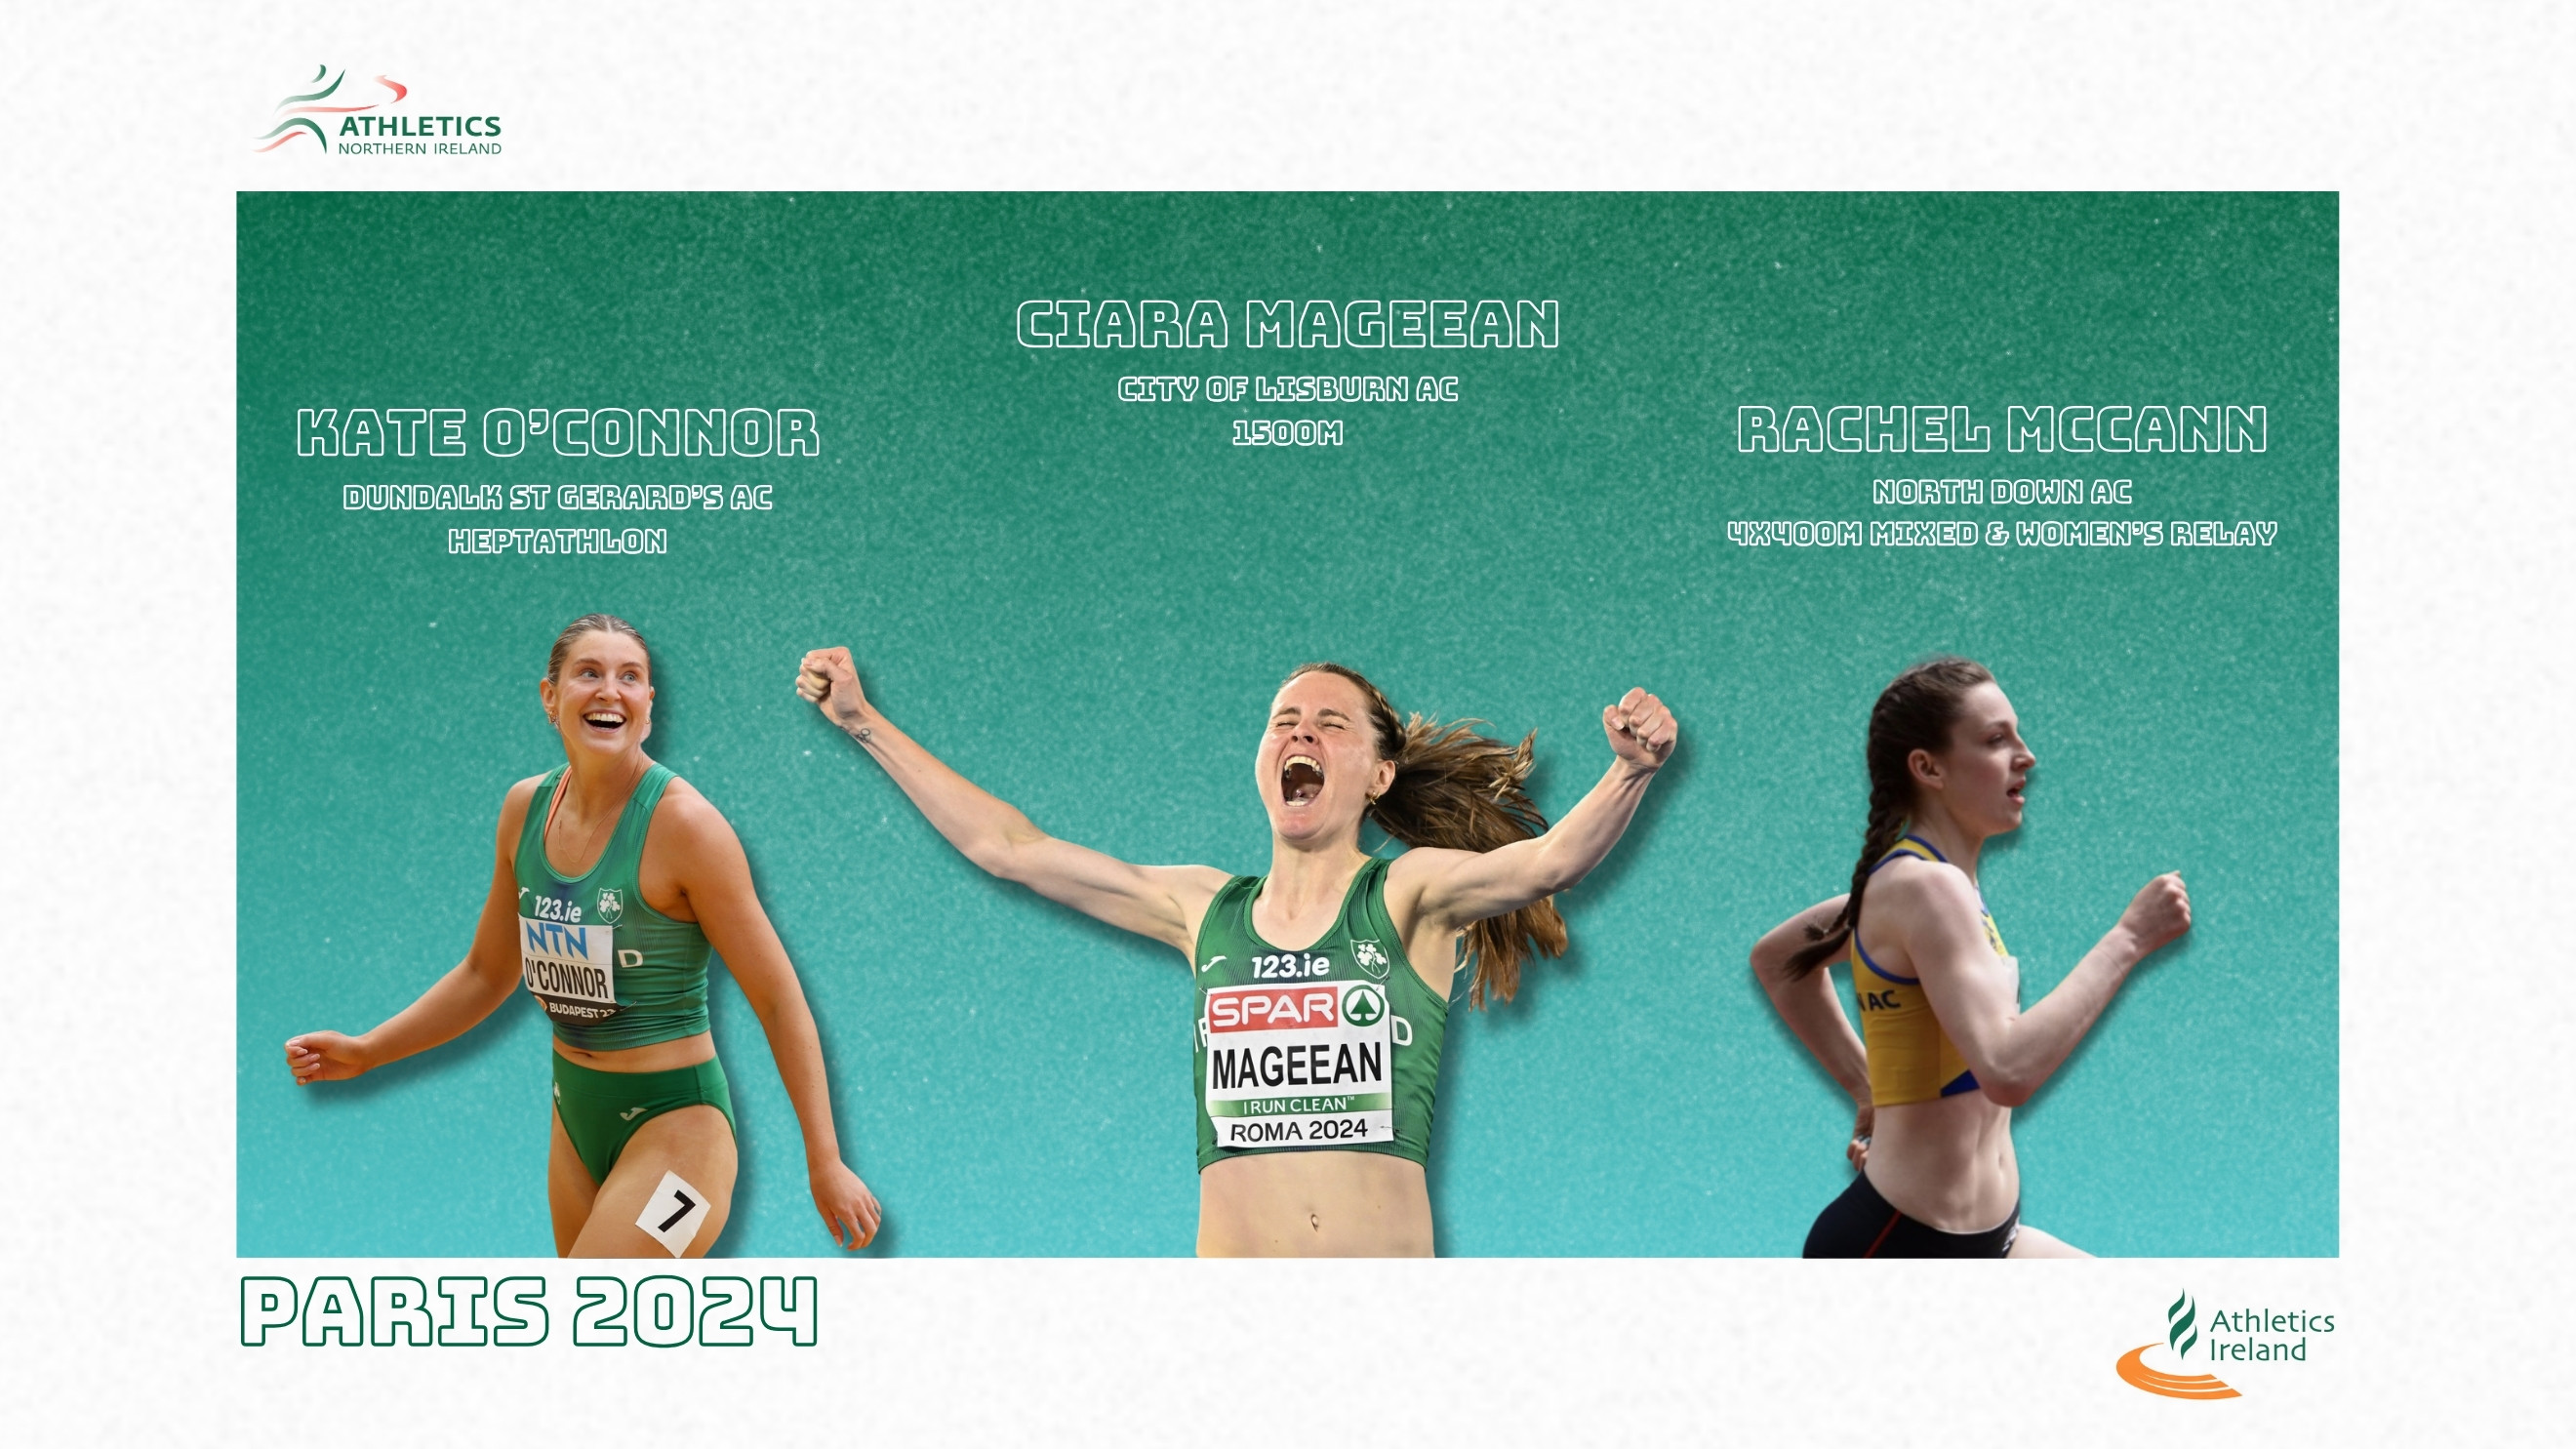 Mageean, O Connor & McCann Are Going to the Olympics